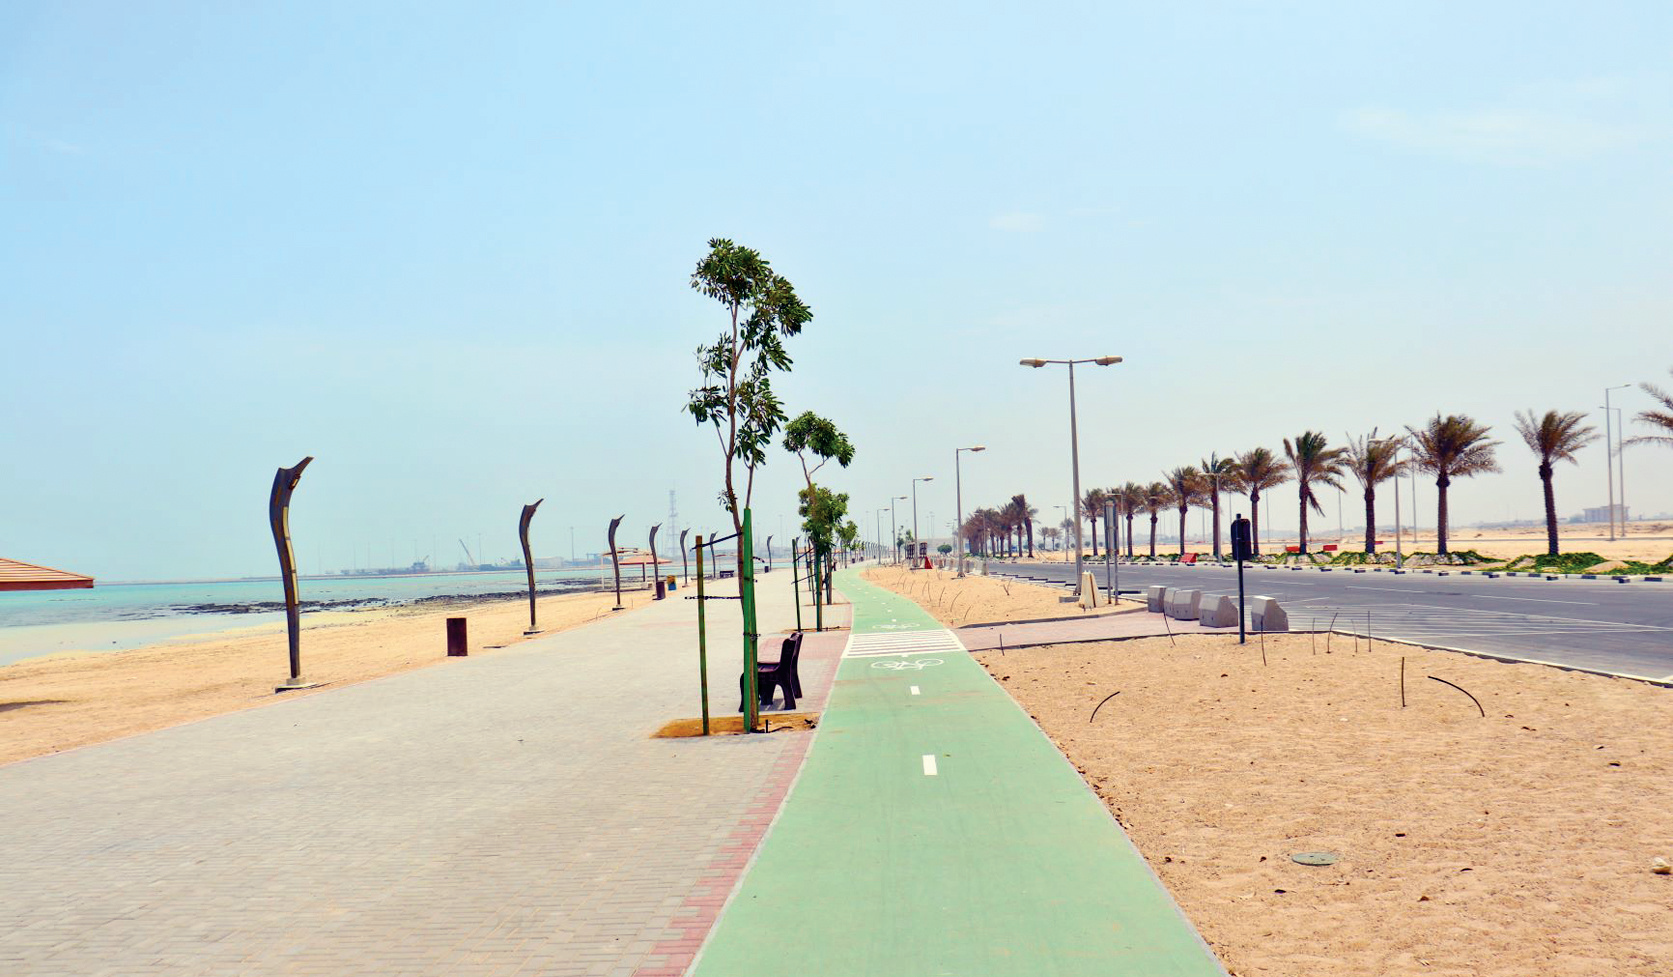 85% of development work completed in Al-Shamal Beach project